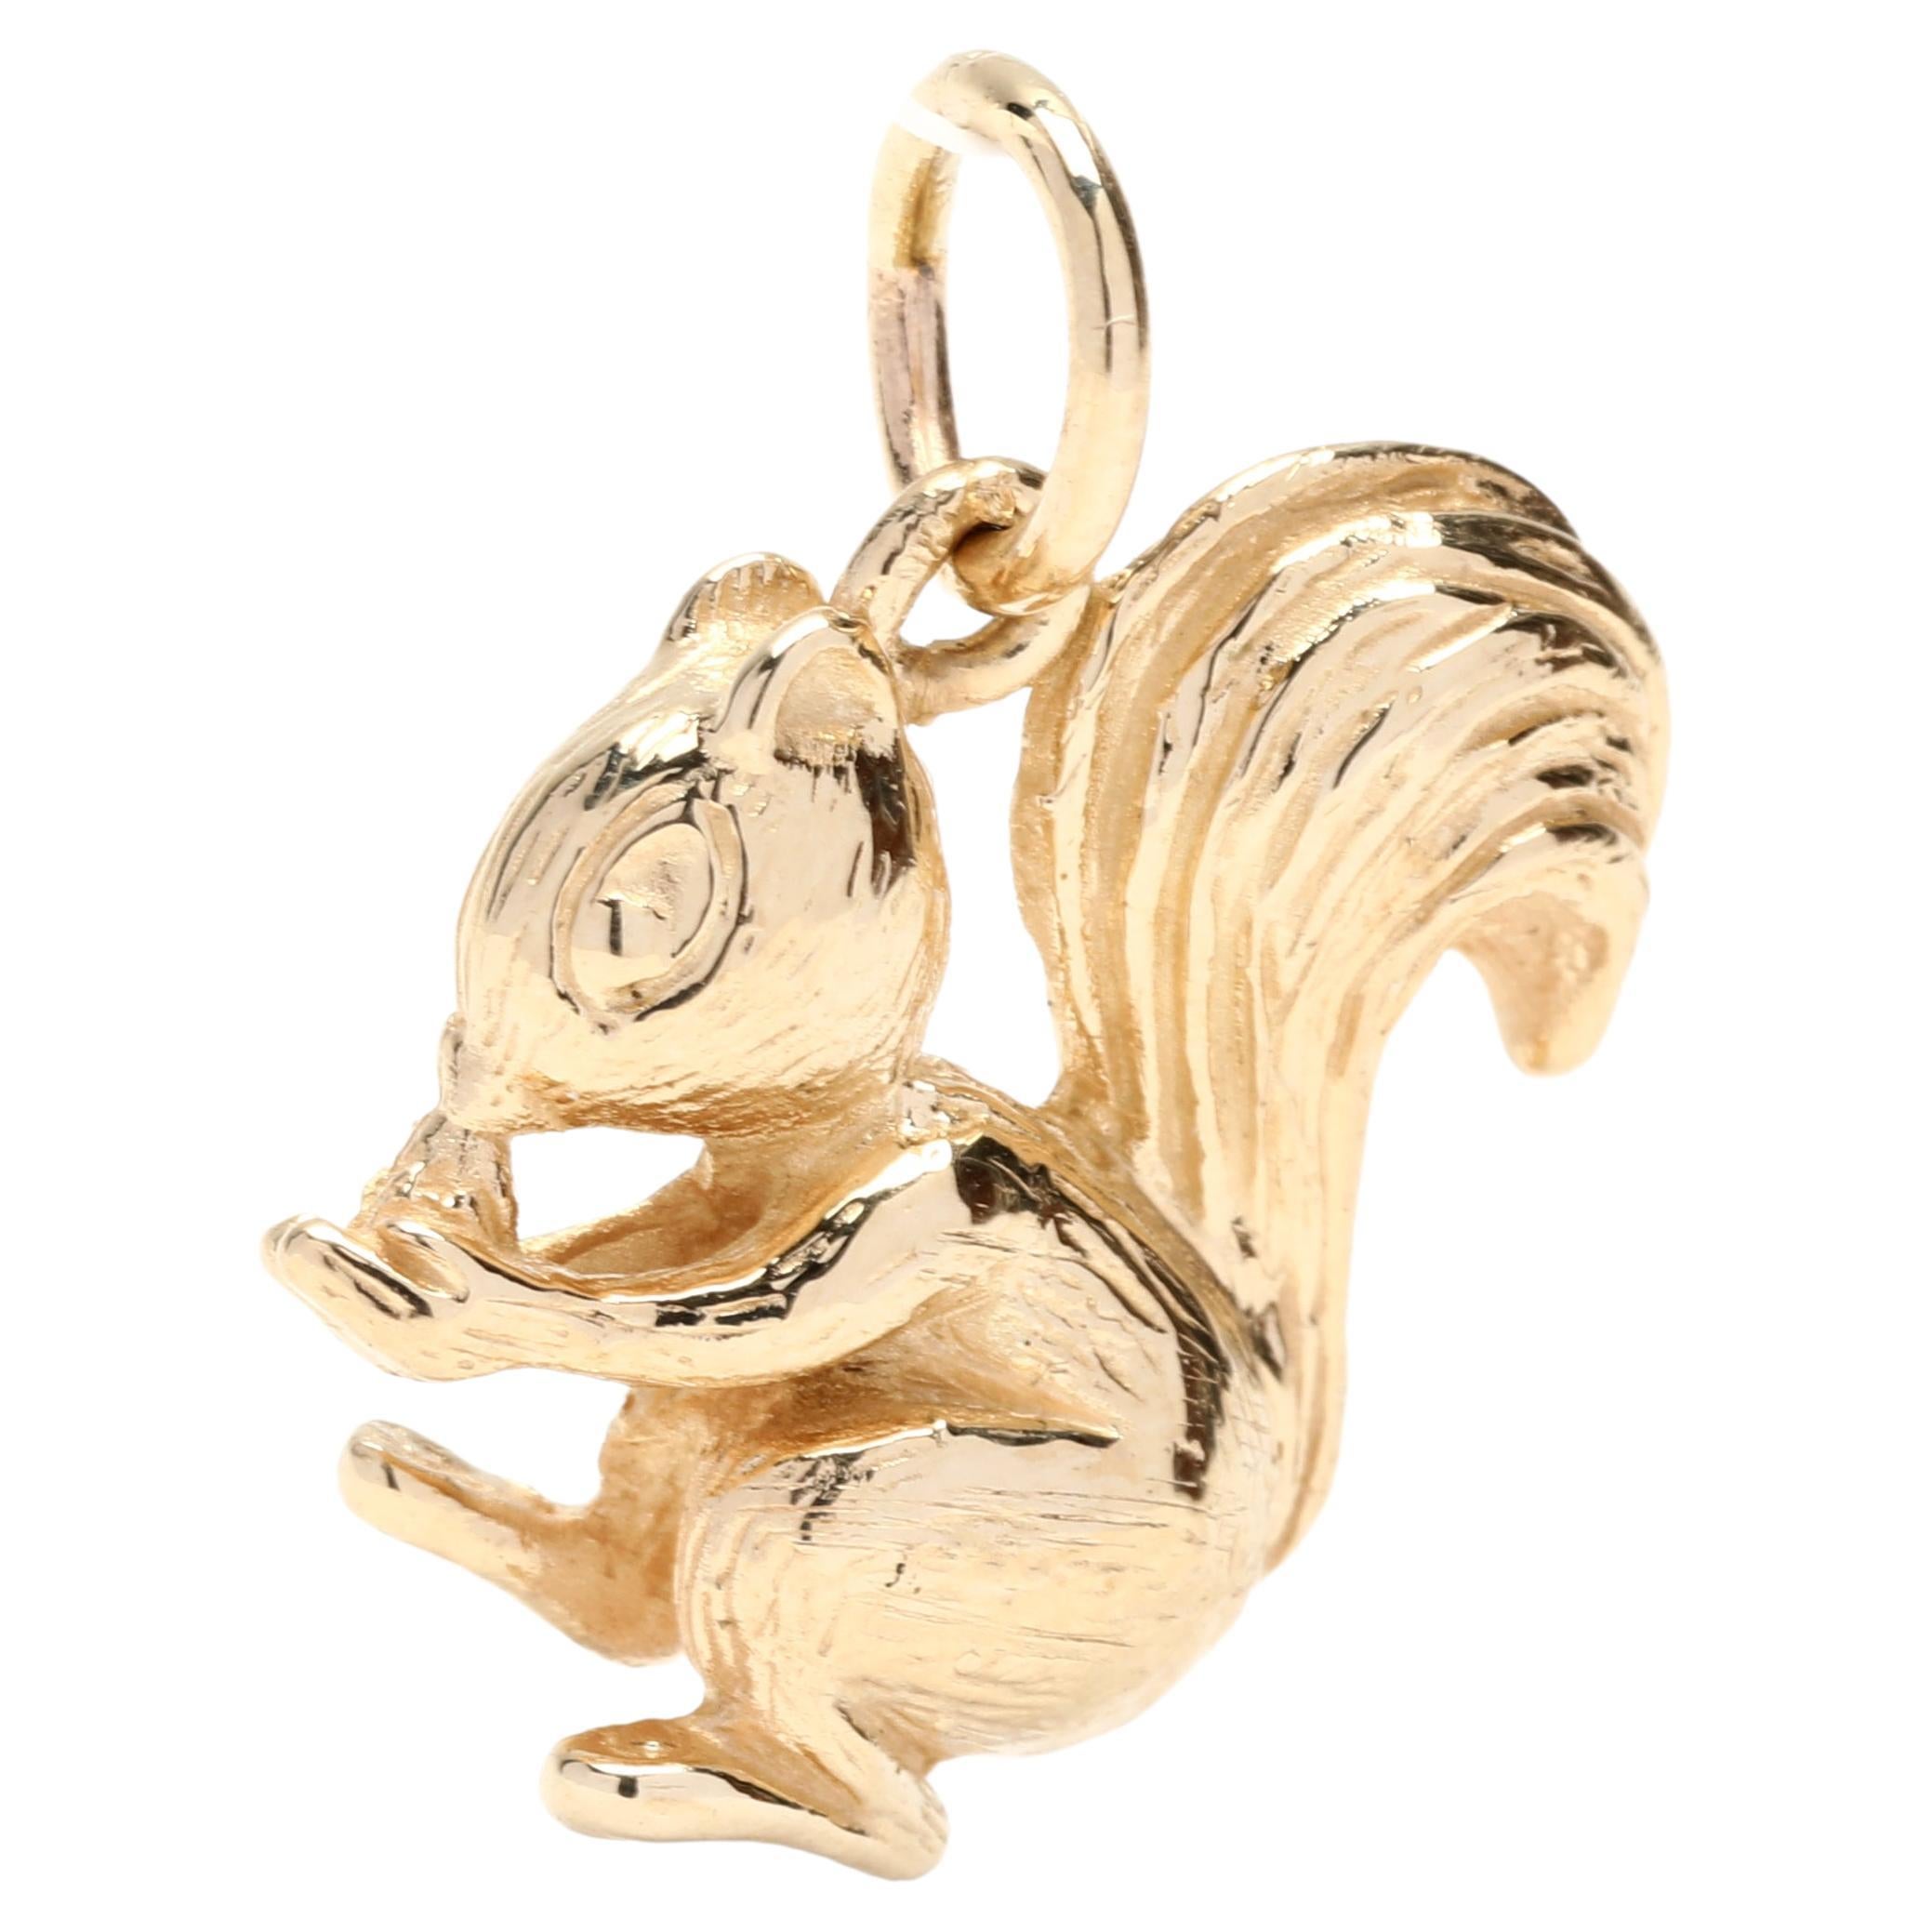 Engraved Gold Squirrel Charm, 14k Yellow Gold, Small Gold